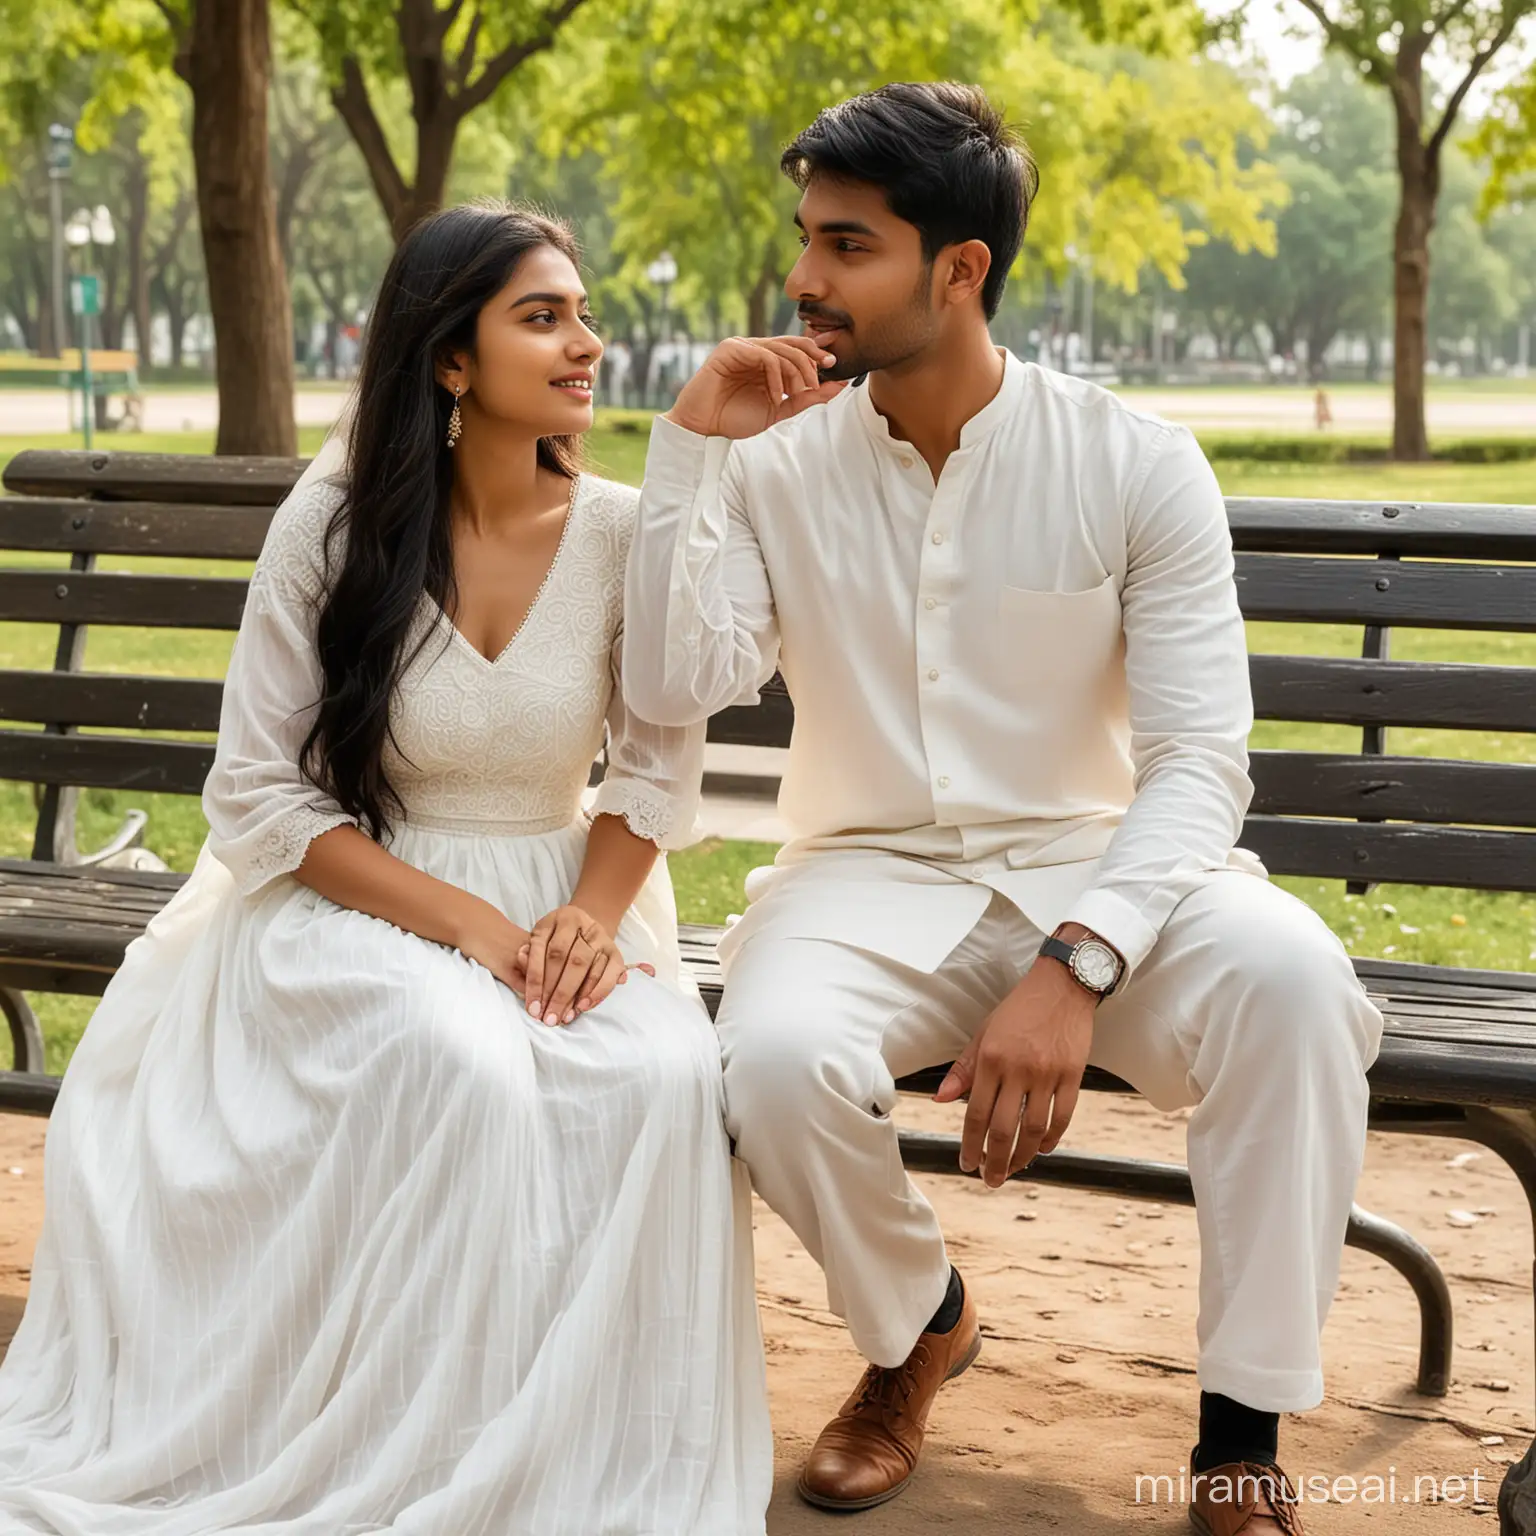 A young indian beautiful modern girl wearing white long dress and a young indian man, he is touching her face, sitting in a park bench,